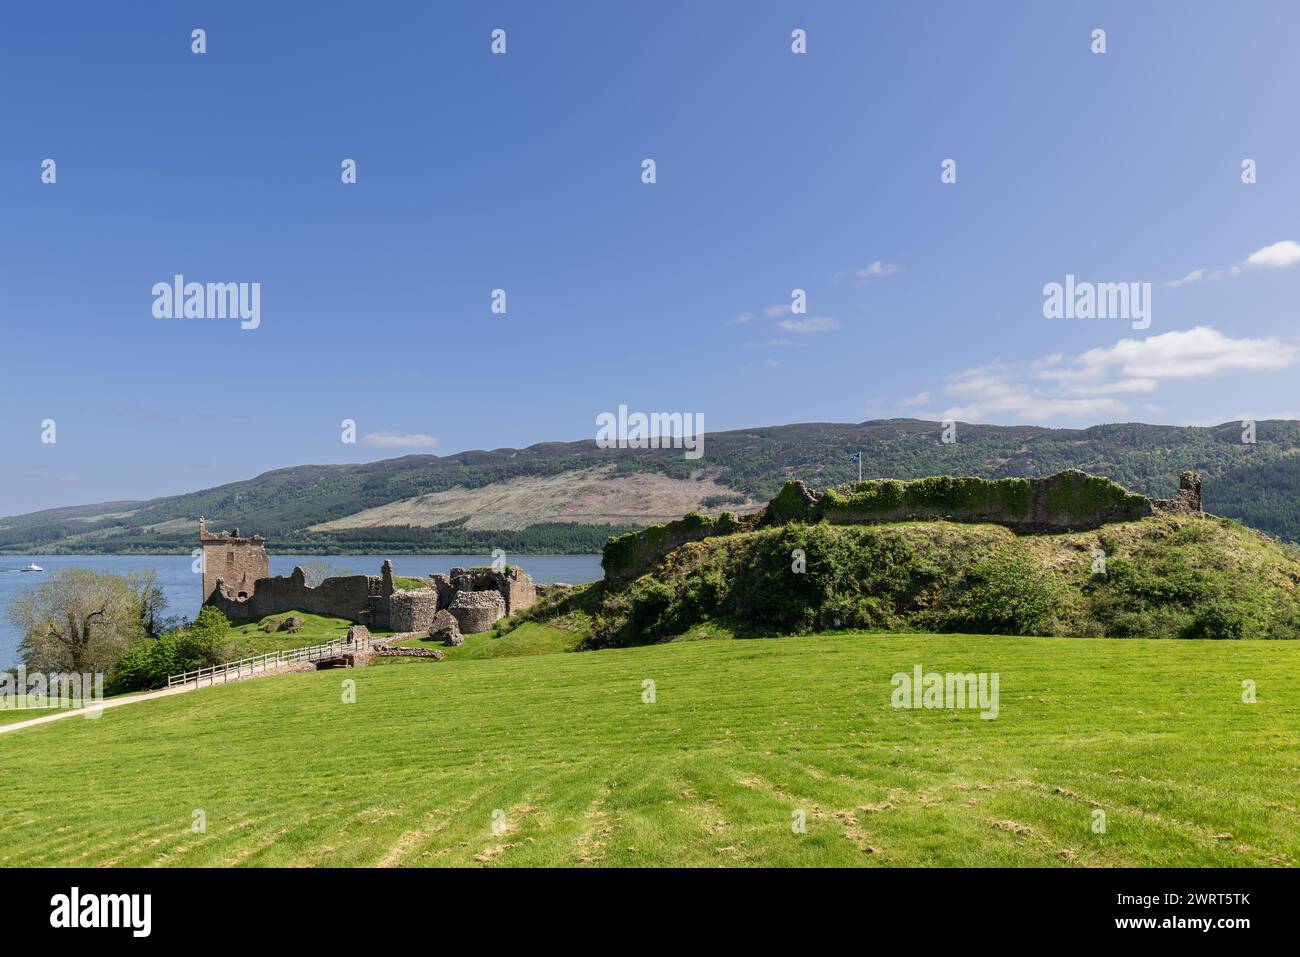 A vibrant view captures Urquhart Castle ancient ruins against the backdrop of Loch Ness and the verdant Scottish Highlands Stock Photo